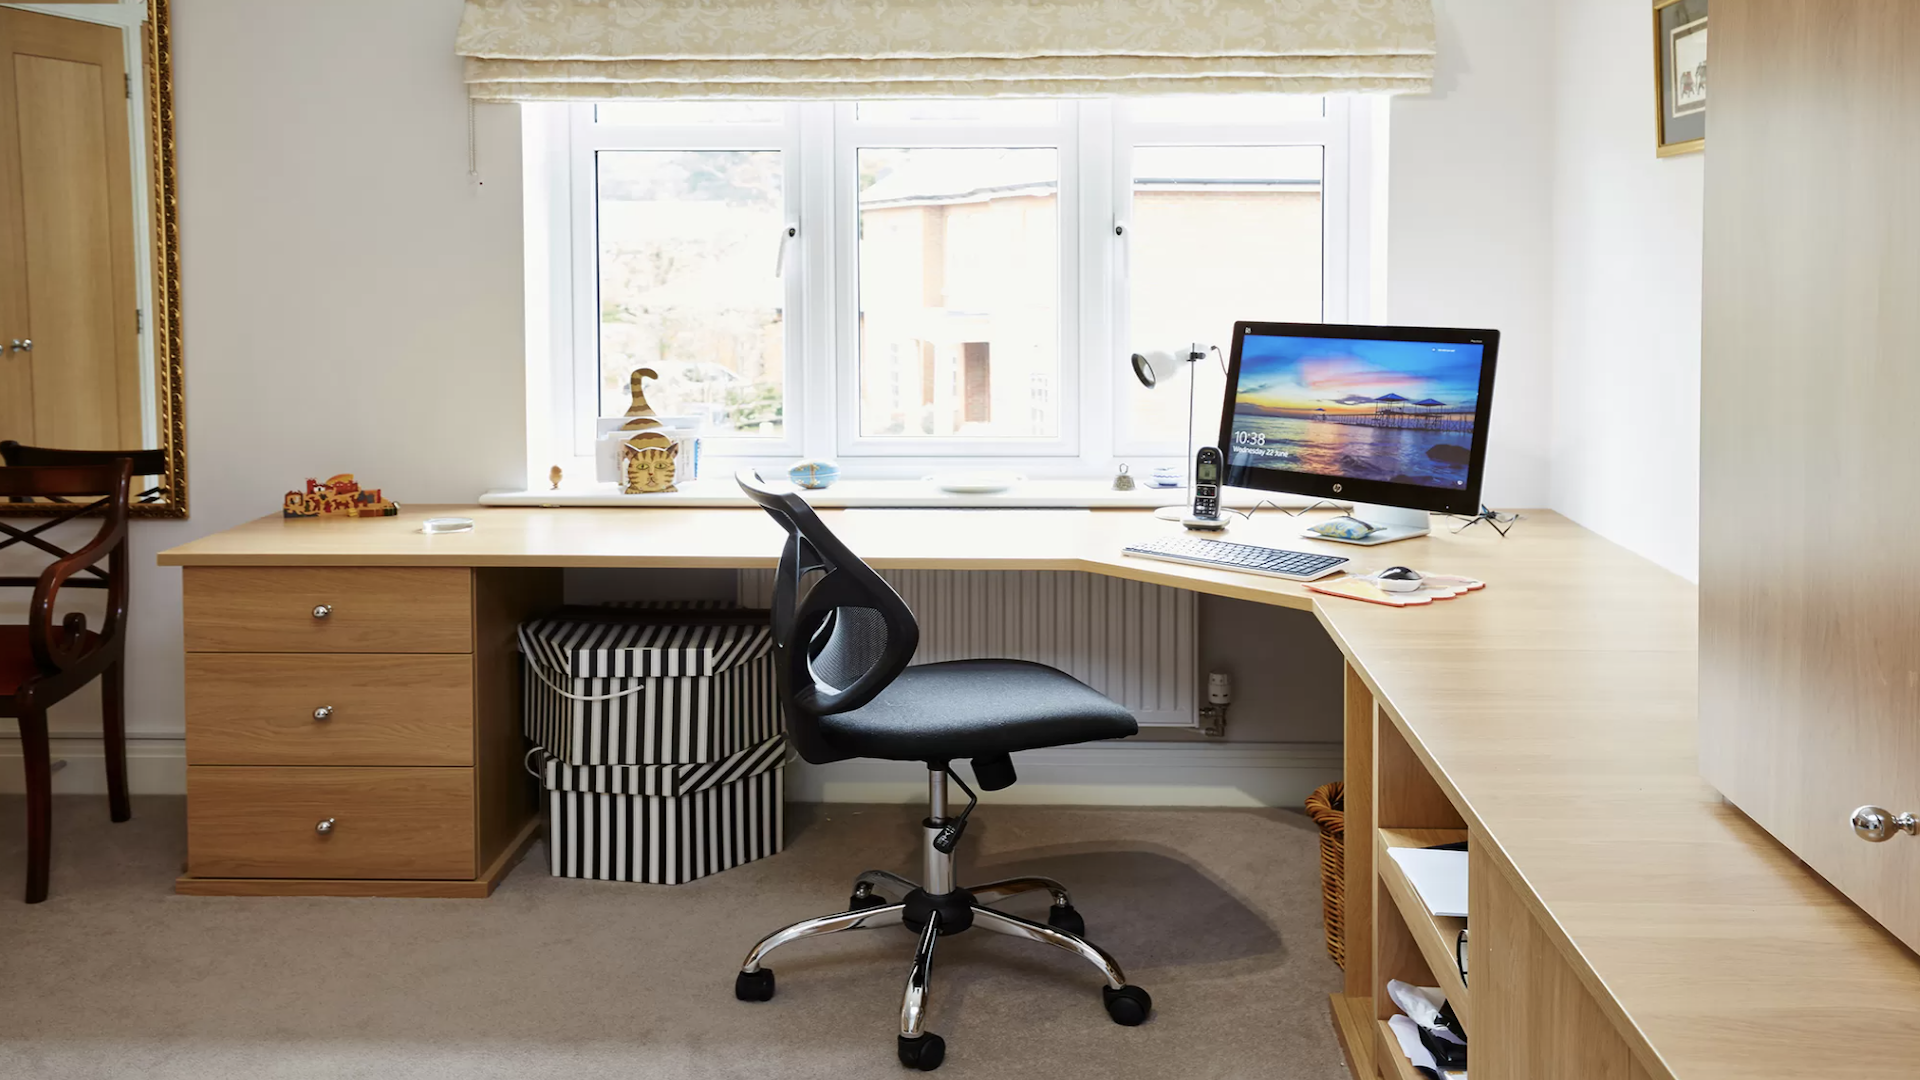 Designing Your Home Office Setup for Maximum Productivity: Tips and Tricks